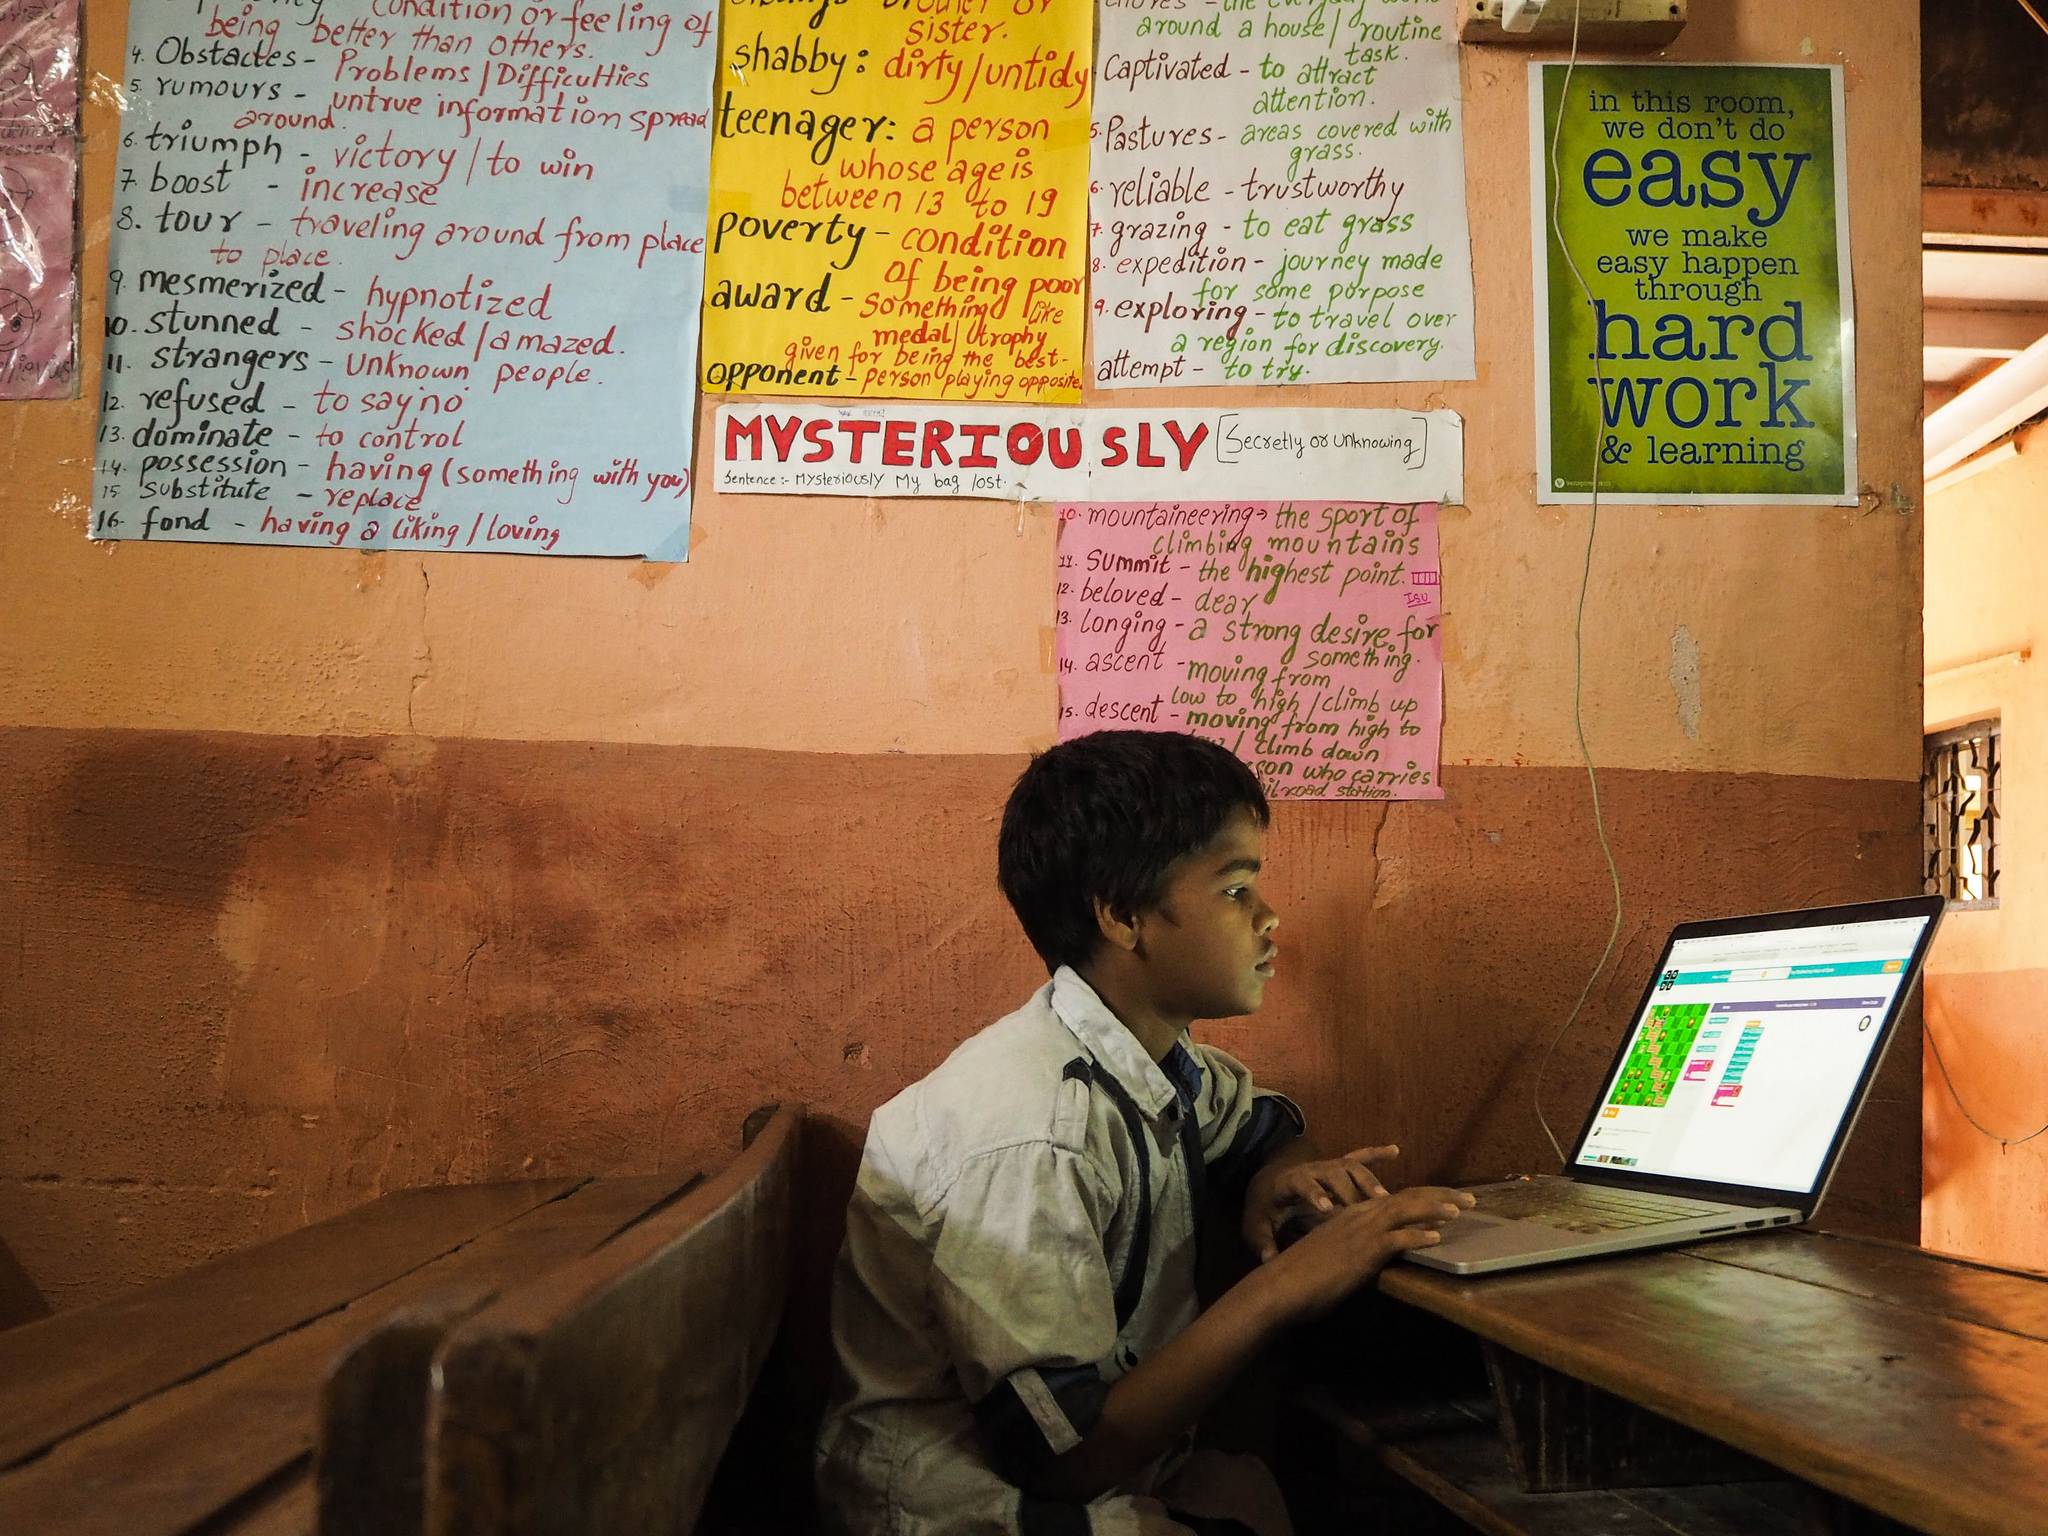 Online education is booming in India